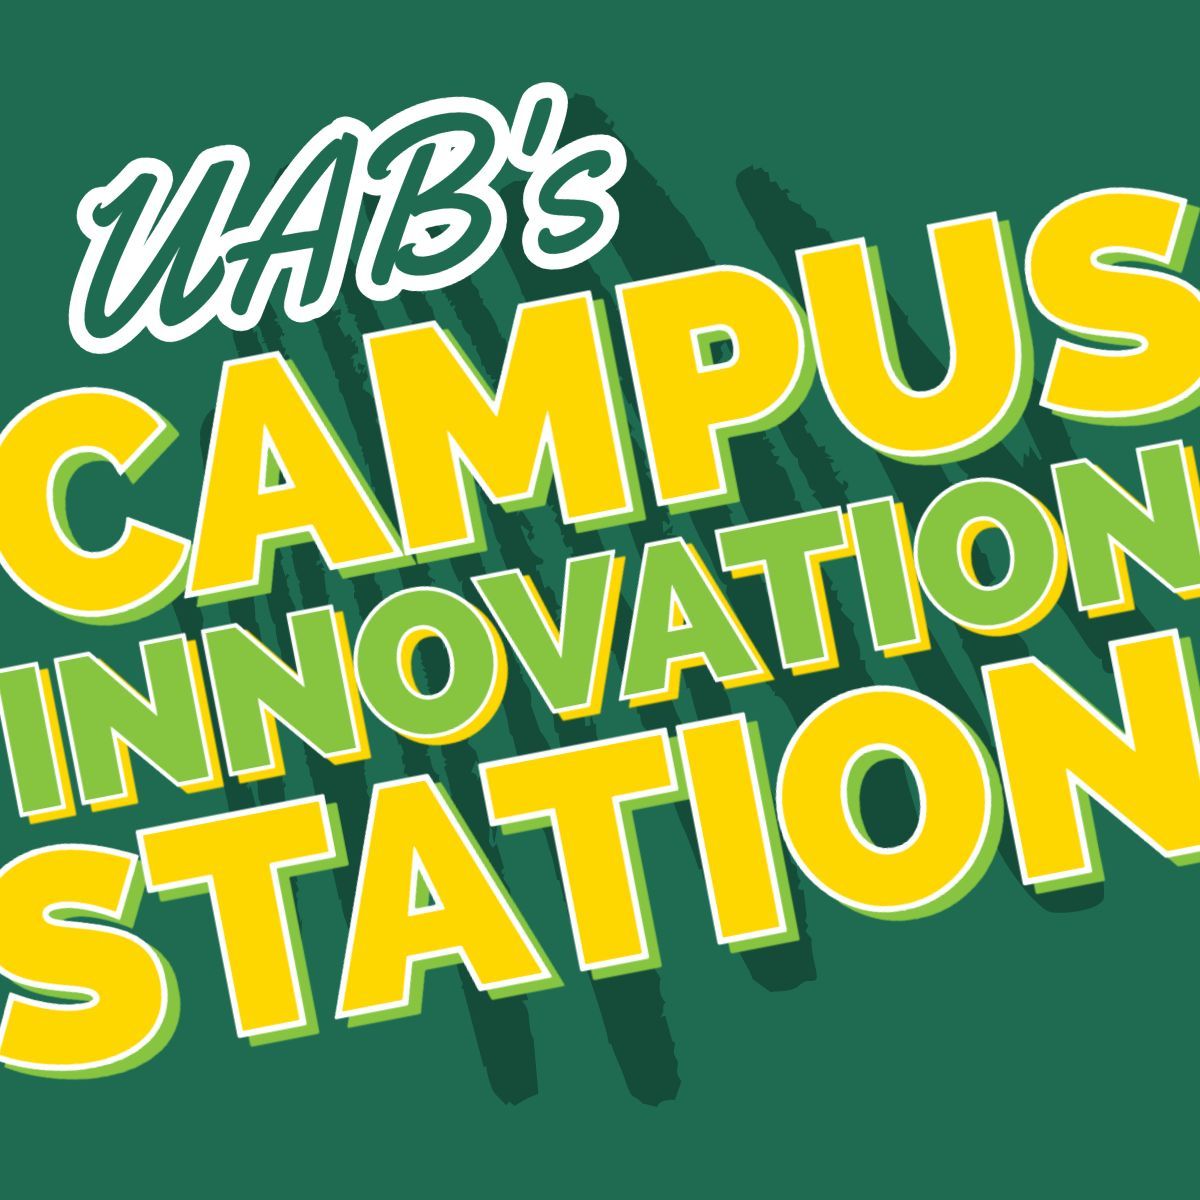 .@UABInnovation is proud to be the @UABNews innovation station! Find out more about technology transfer 👉 buff.ly/3v52NwR.